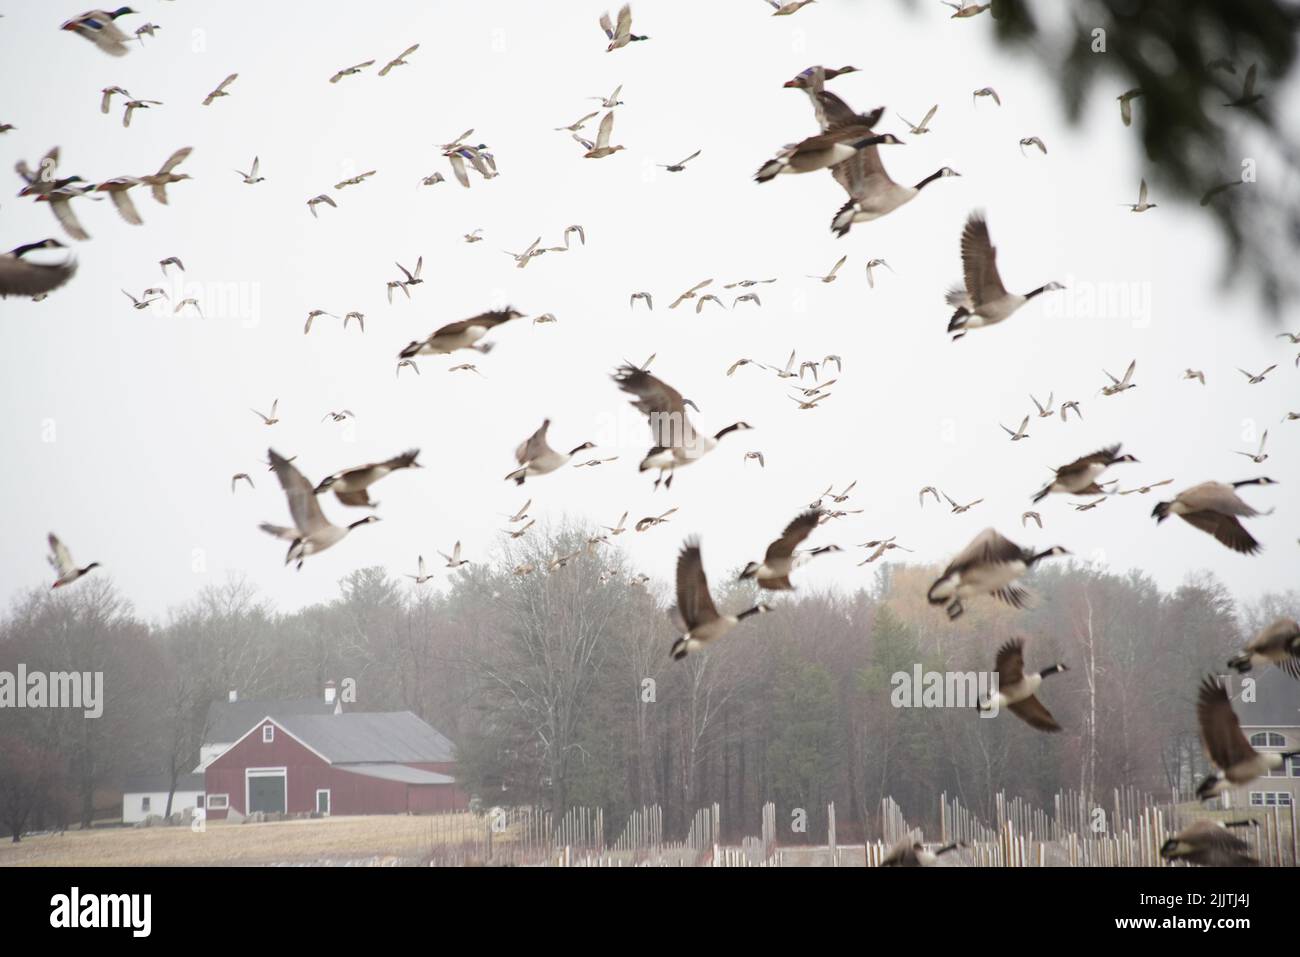 A flock of birds flying in a rural area on a foggy day Stock Photo